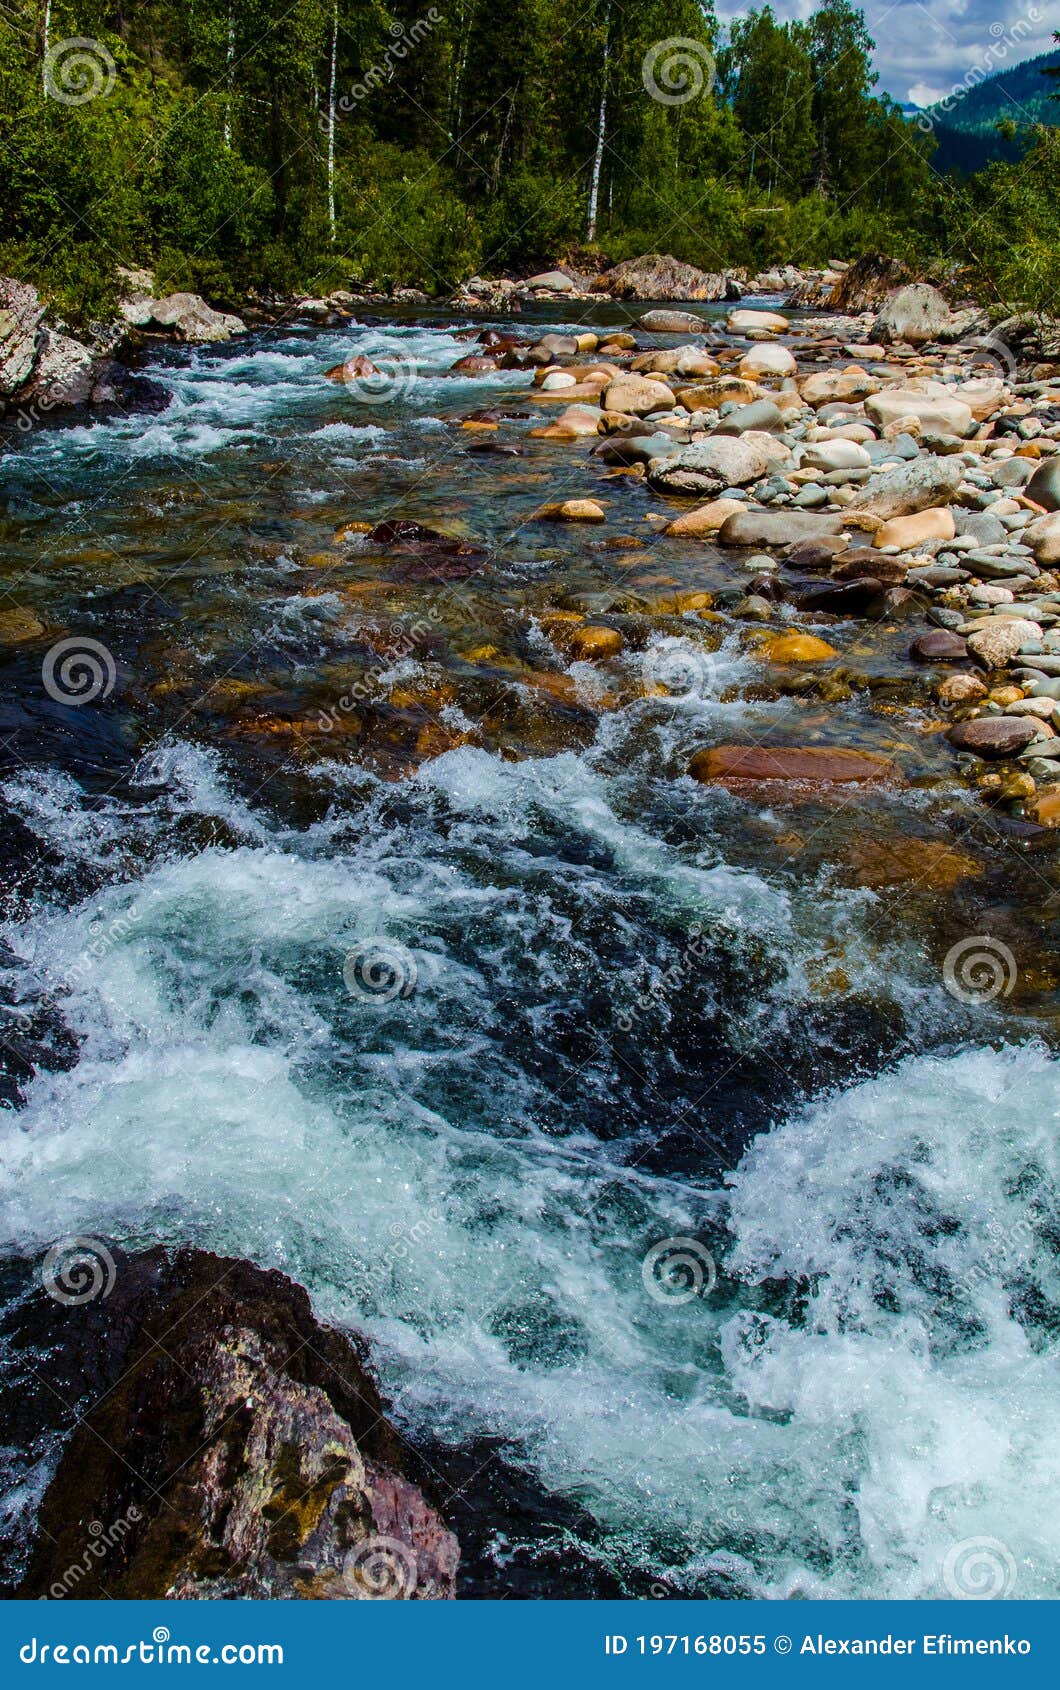 In Summer Rocky Mountain River Water Silk Mountain River Stock Image